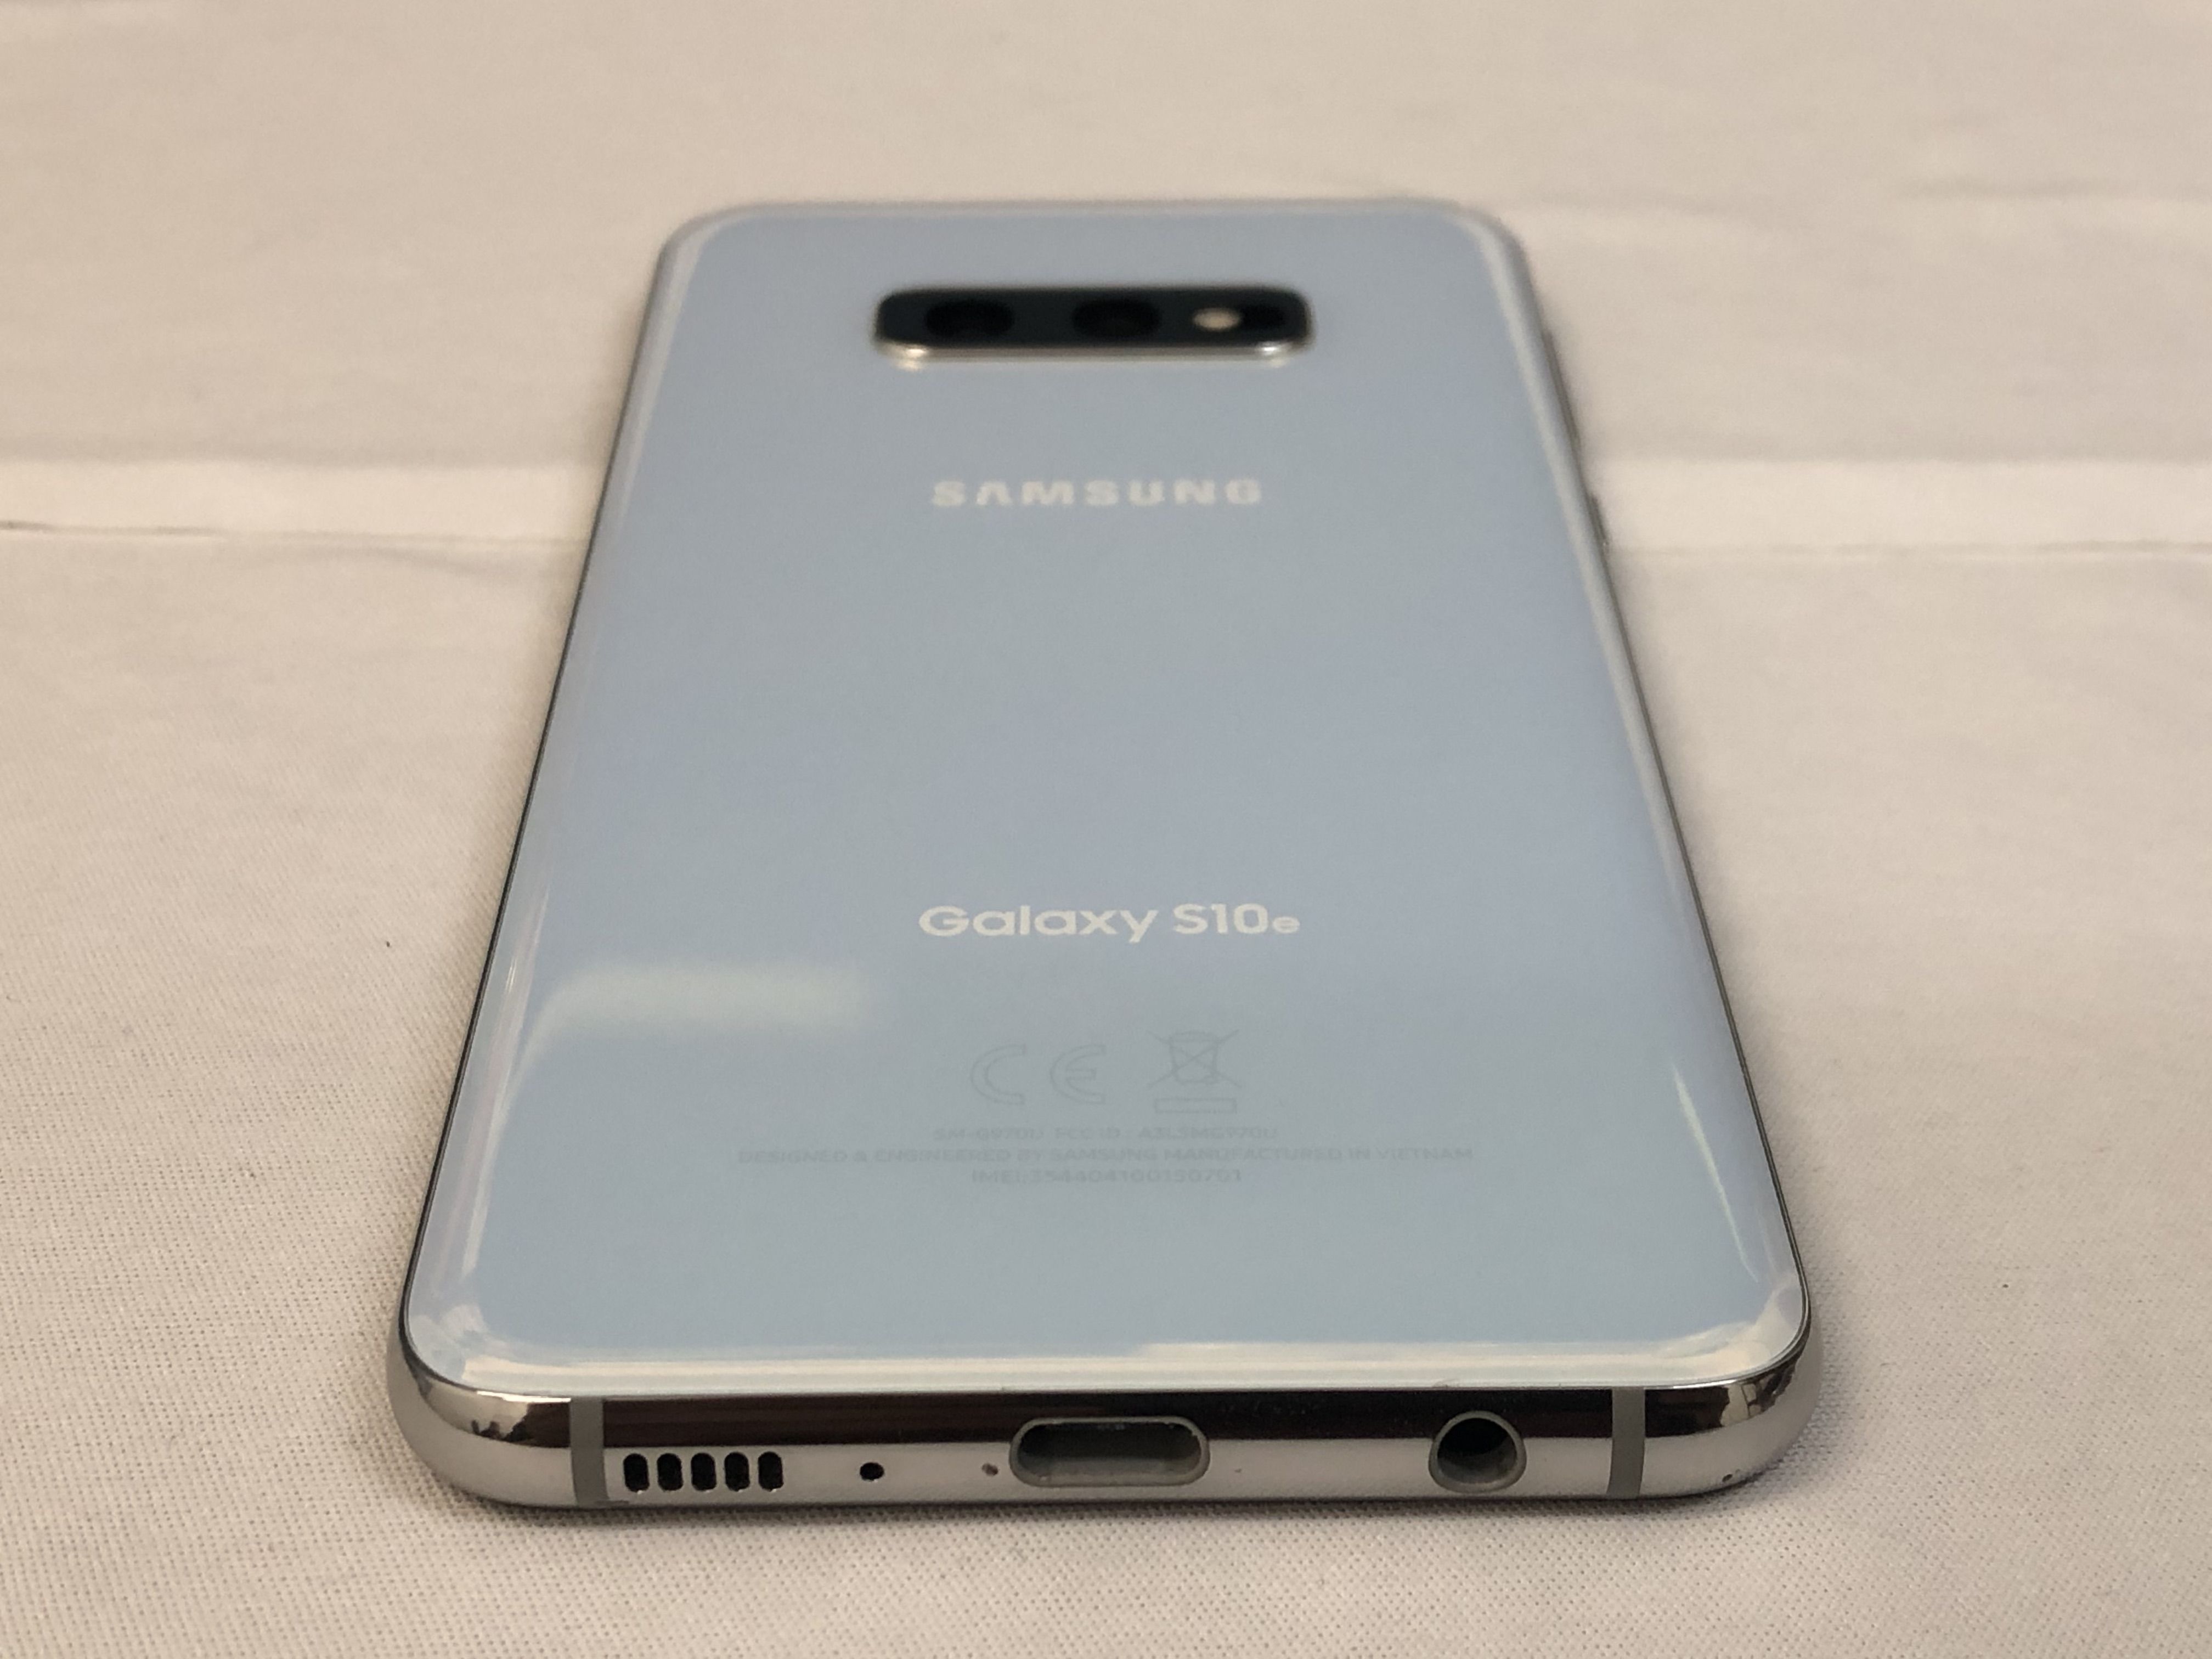 Samsung Galaxy S10e 128GB || White || *GSM UNLOCKED* for AT&T / Ultra Mobile / Simple Mobile / T-Mobile / H2O / Net 10 / Cricket / MetroPCS